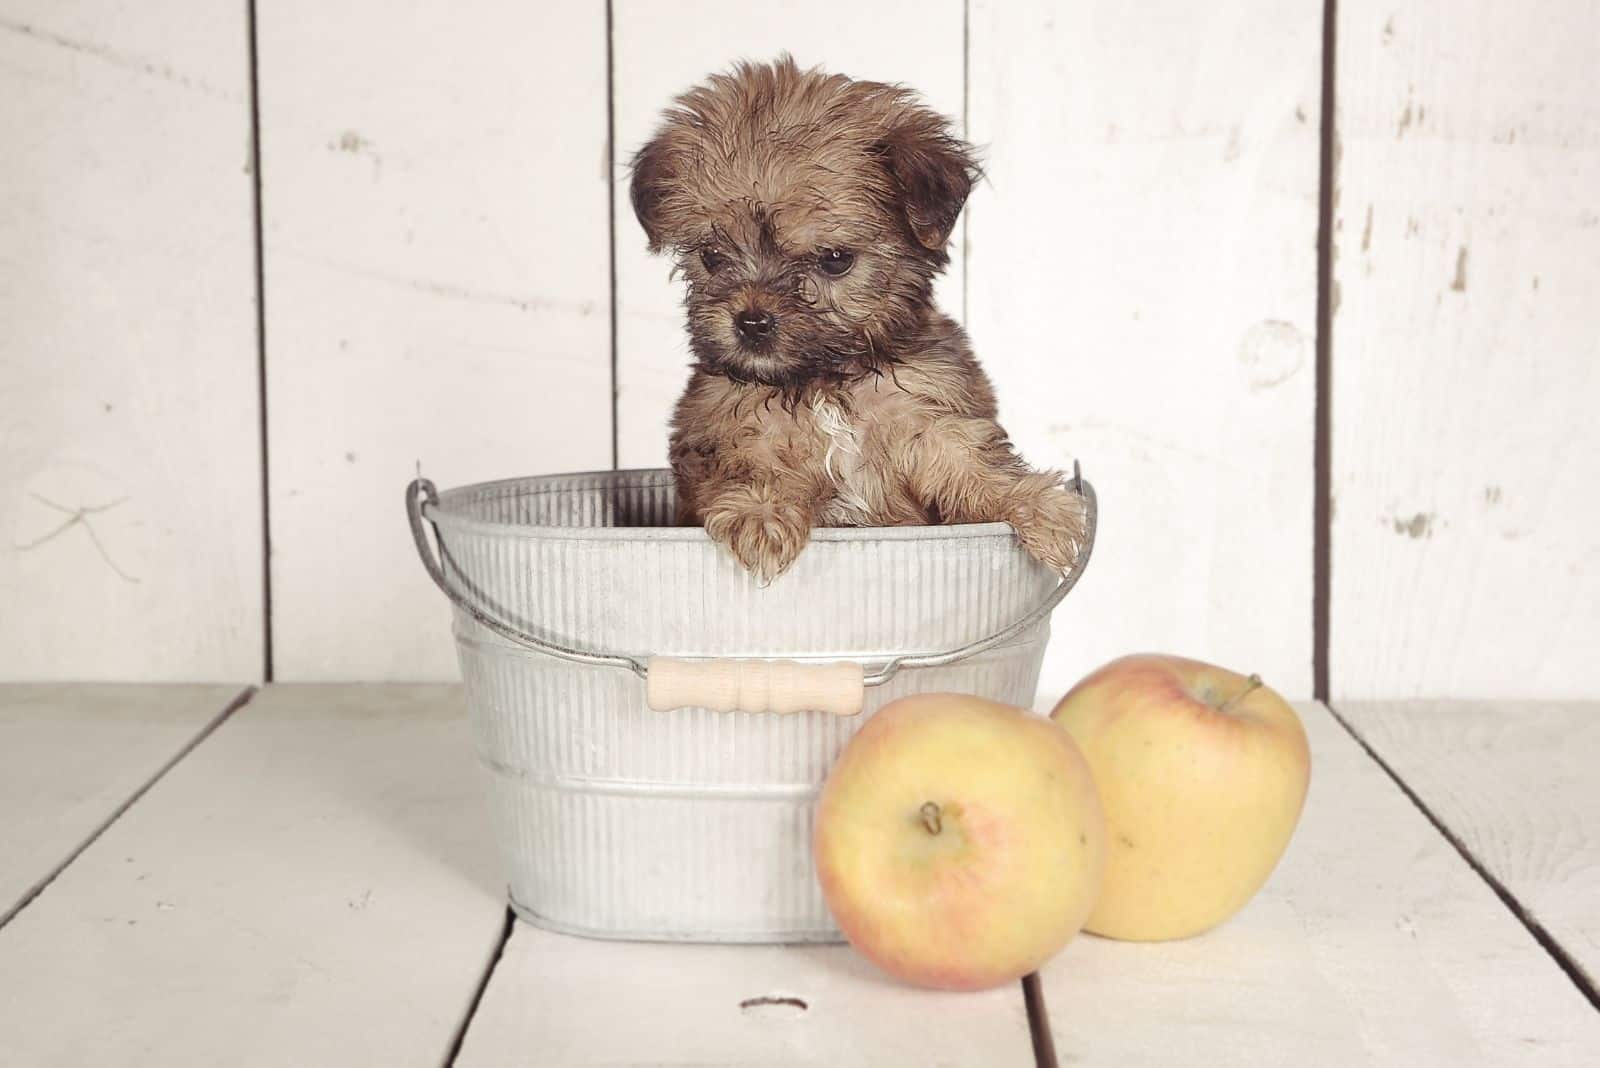 teacup yrokshire terrier inside a basket with two apples outside